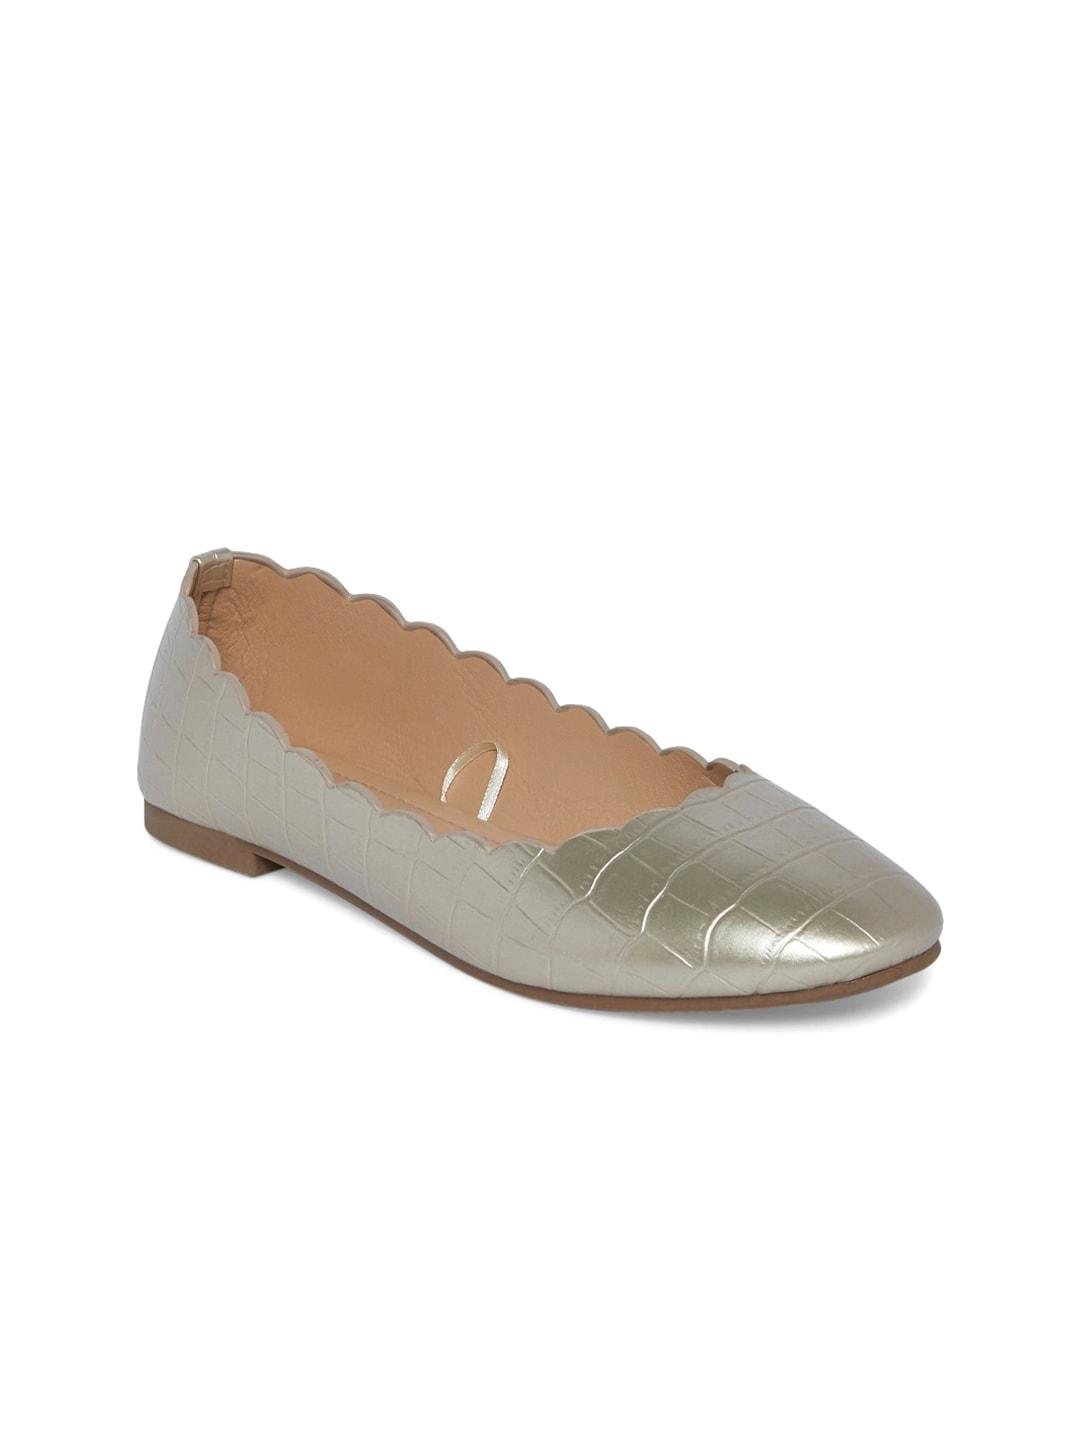 Forever Glam by Pantaloons Women Gold-Toned Ballerinas Flats